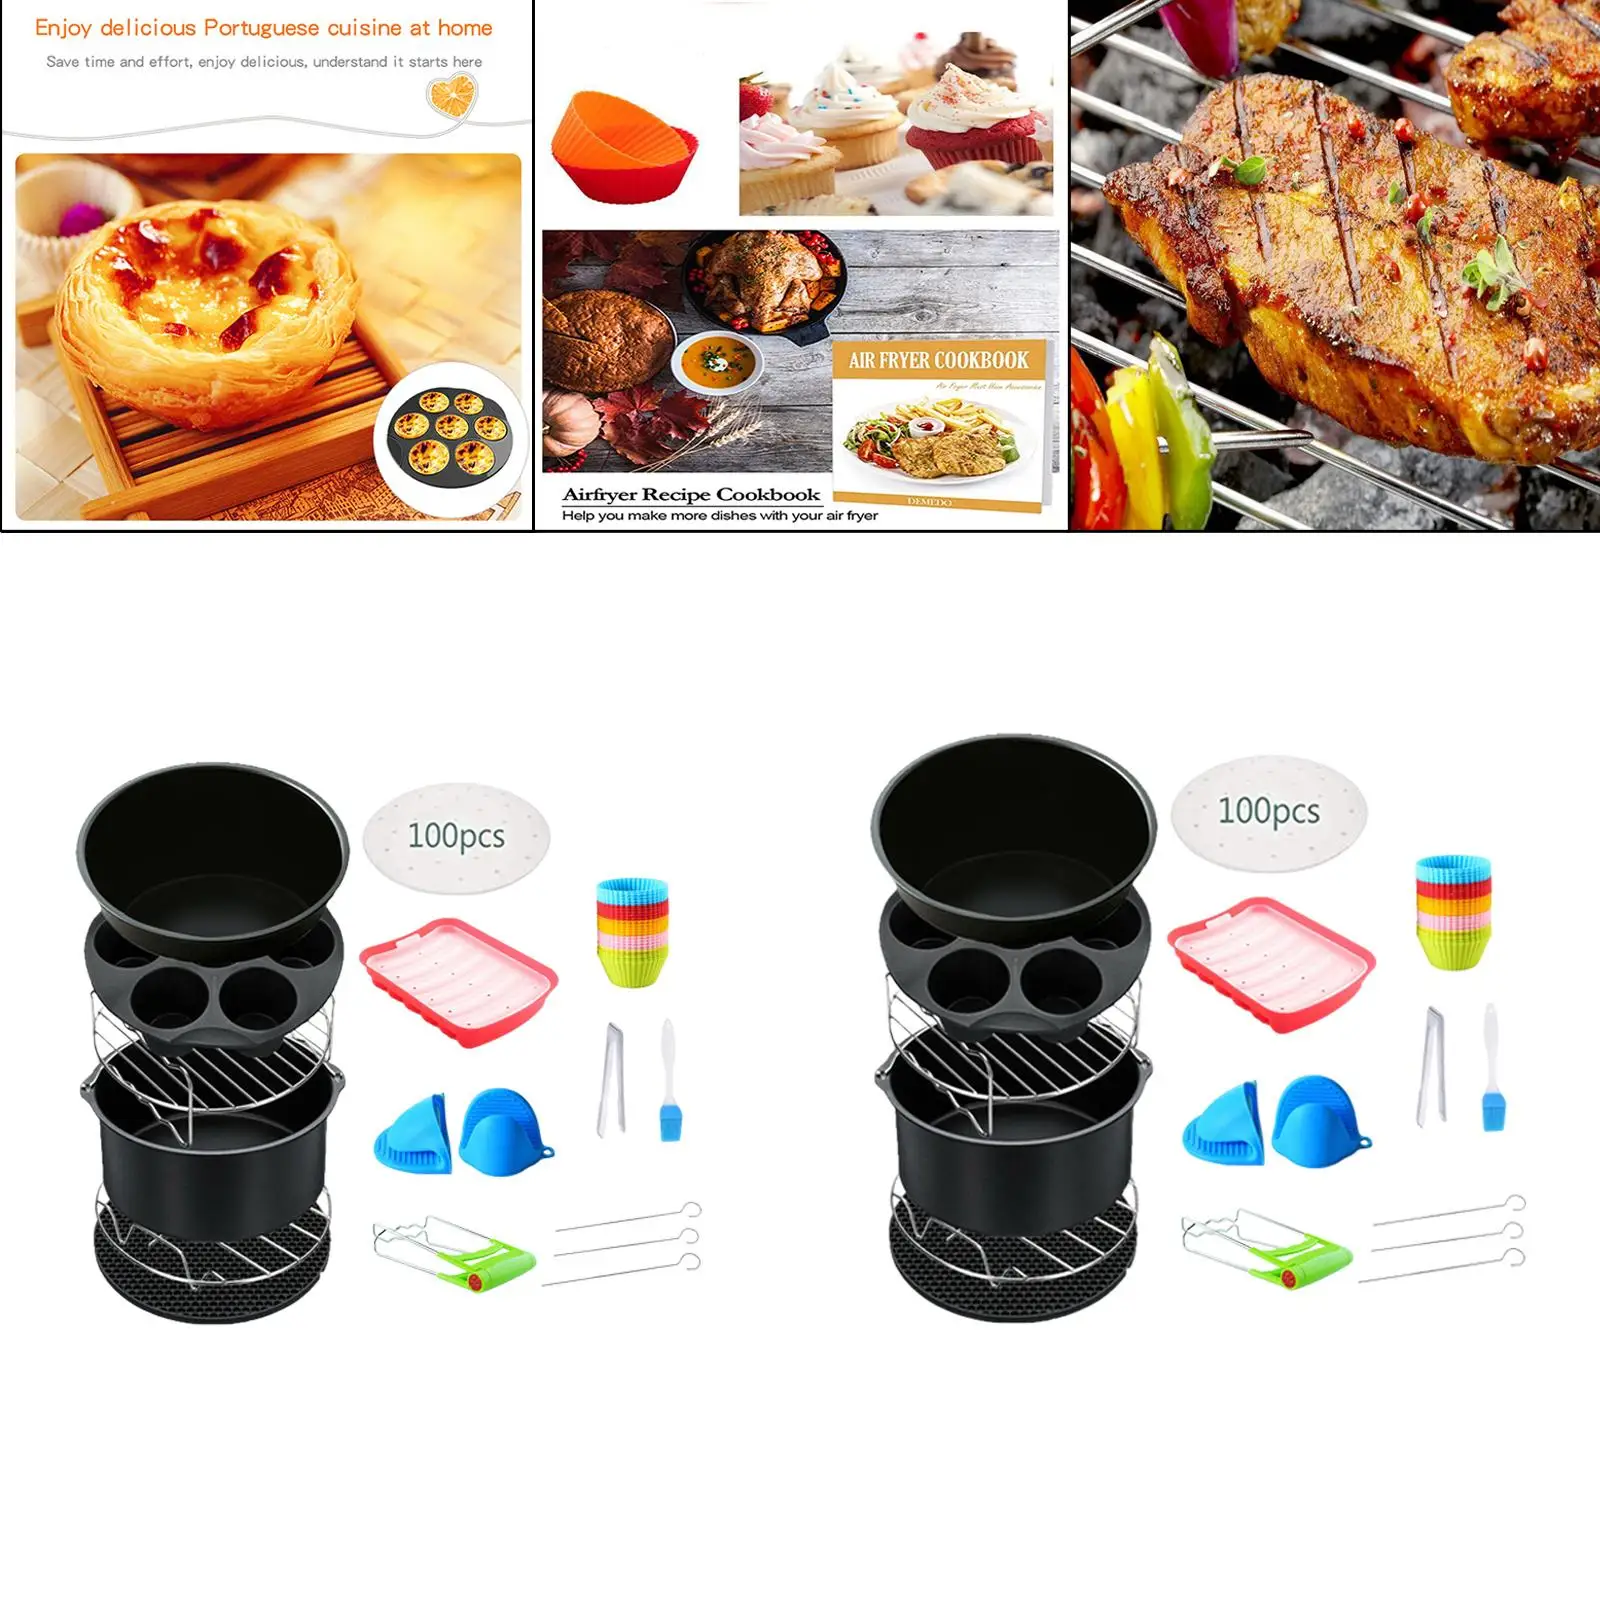 13Pcs Air Fryer Airfryer Accessories Kit Hot Dog Mould Skewer Rack for 4.5L-5.2L Capacity